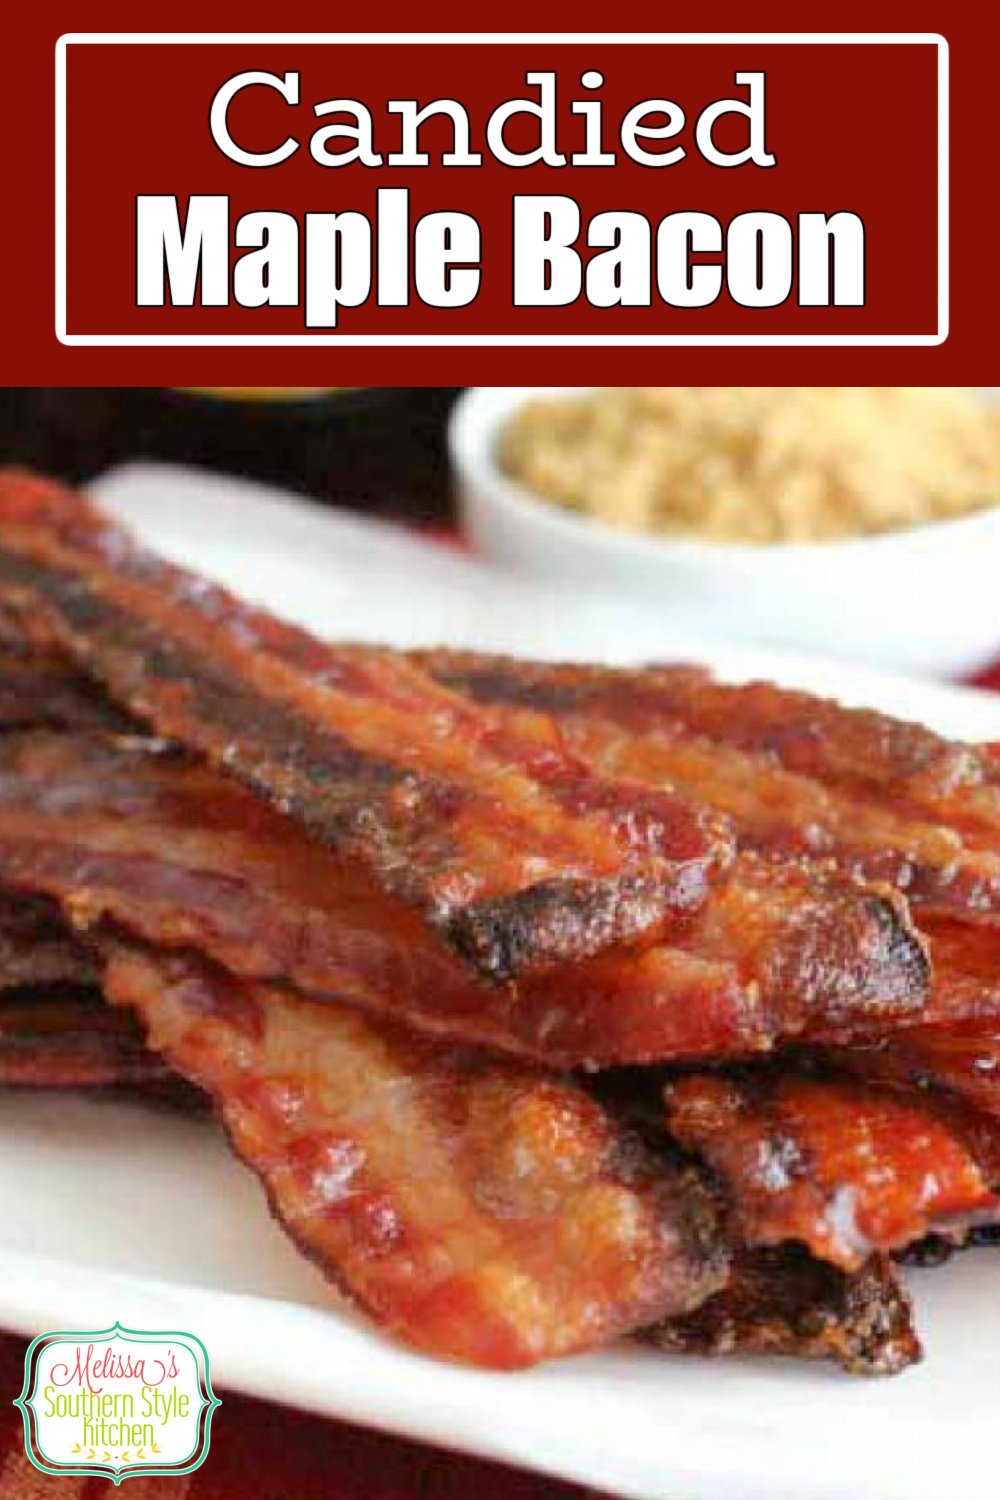 Candied Maple Bacon is a delicious option for breakfast, brunch, sandwiches sand salads #candiedbacon #maplebacon #baconrecipes #bakedbacon #bacon#bestcandiedbacon #easyrecipes #bacon #food #breakfast #brunch #holidayrecipes #southernrecipes #southernfood #melissassouthernstylekitchen via @melissasssk